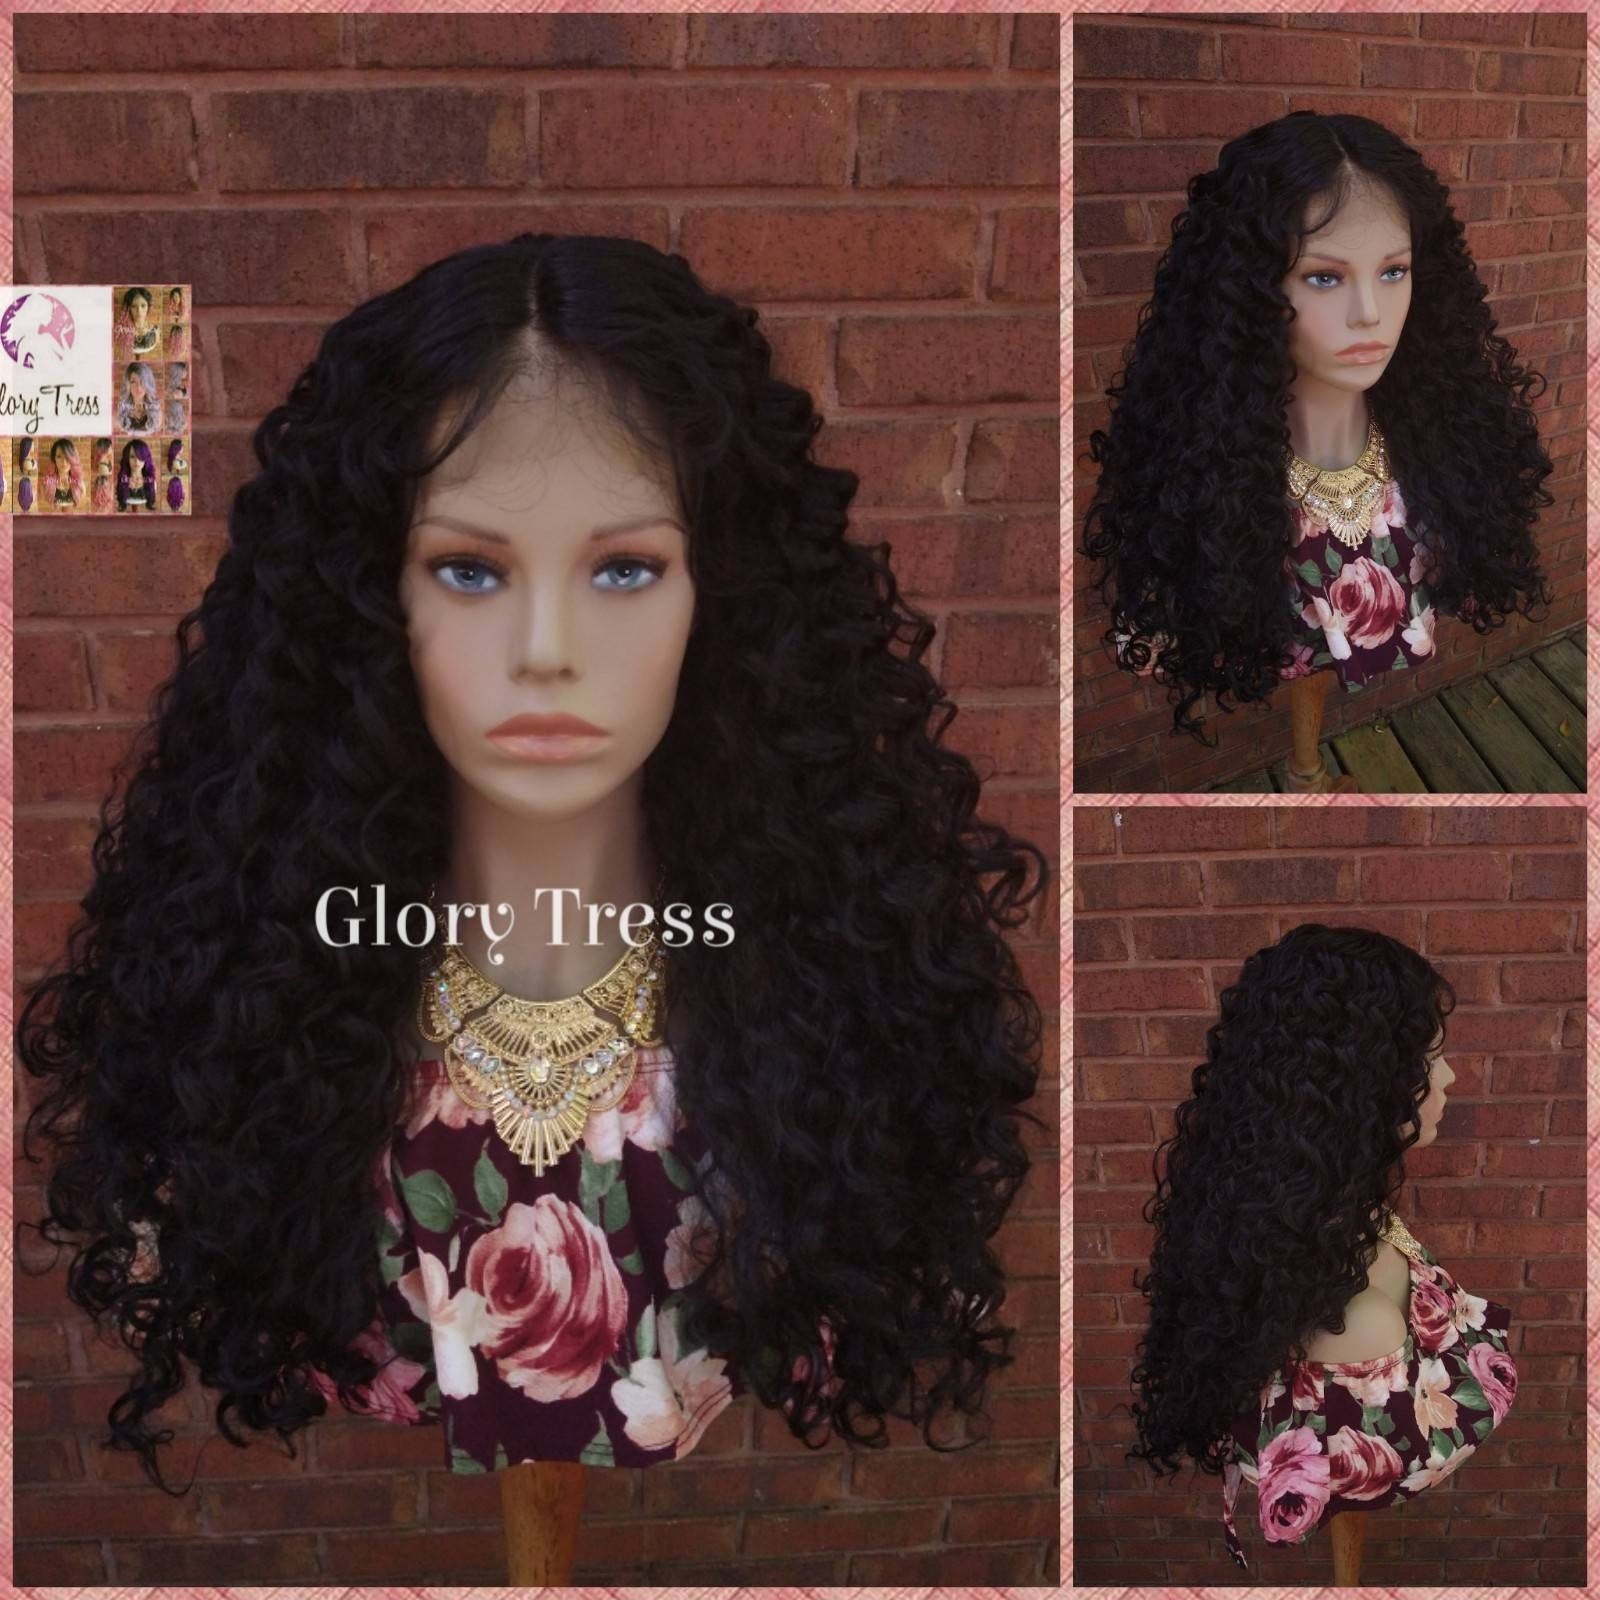 Curly Lace Front Wig, Black Curly Wig, Big Curly Wig, African American Wig, Glory Tress, READY To SHIP // MARVEL